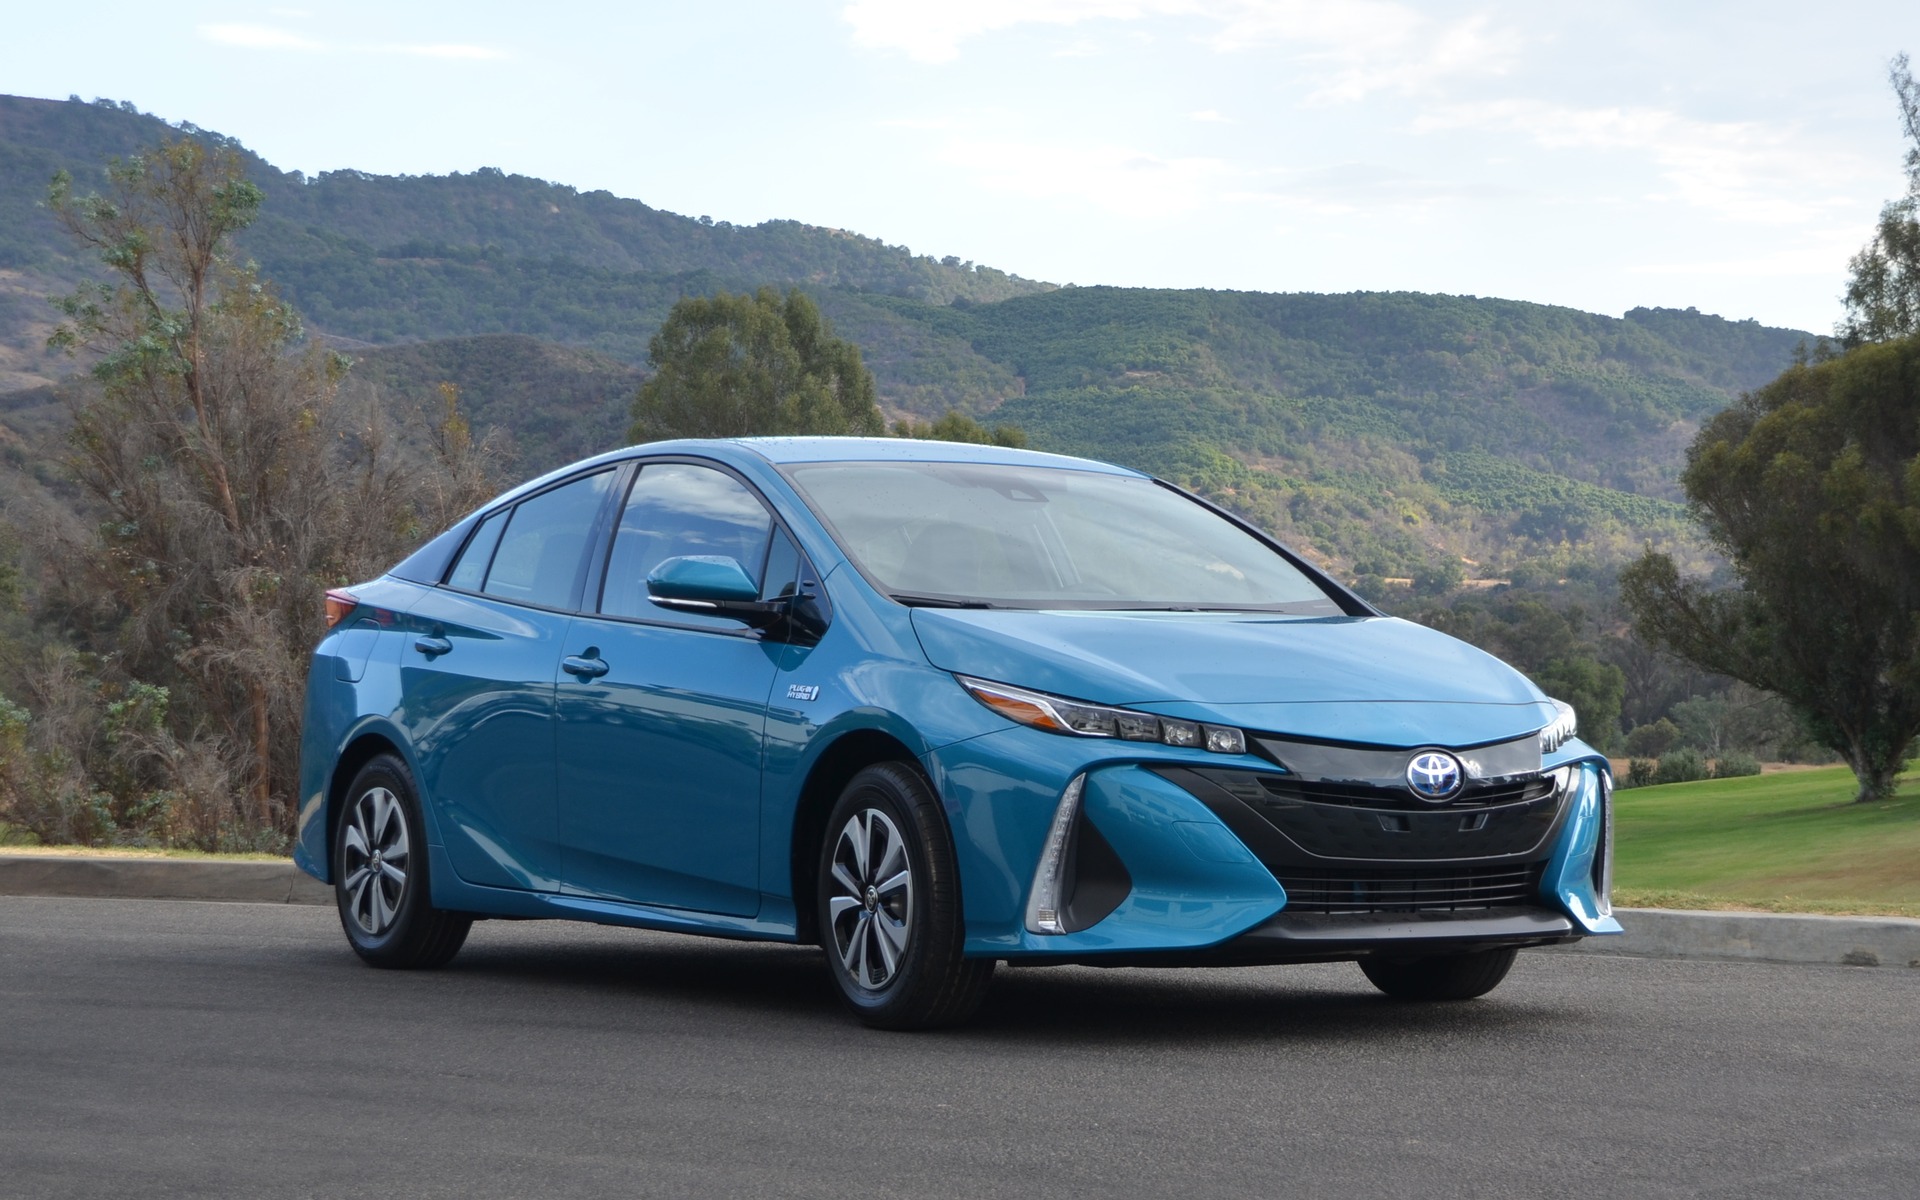 2017 Toyota Prius Prime Pricing Announced - The Car Guide